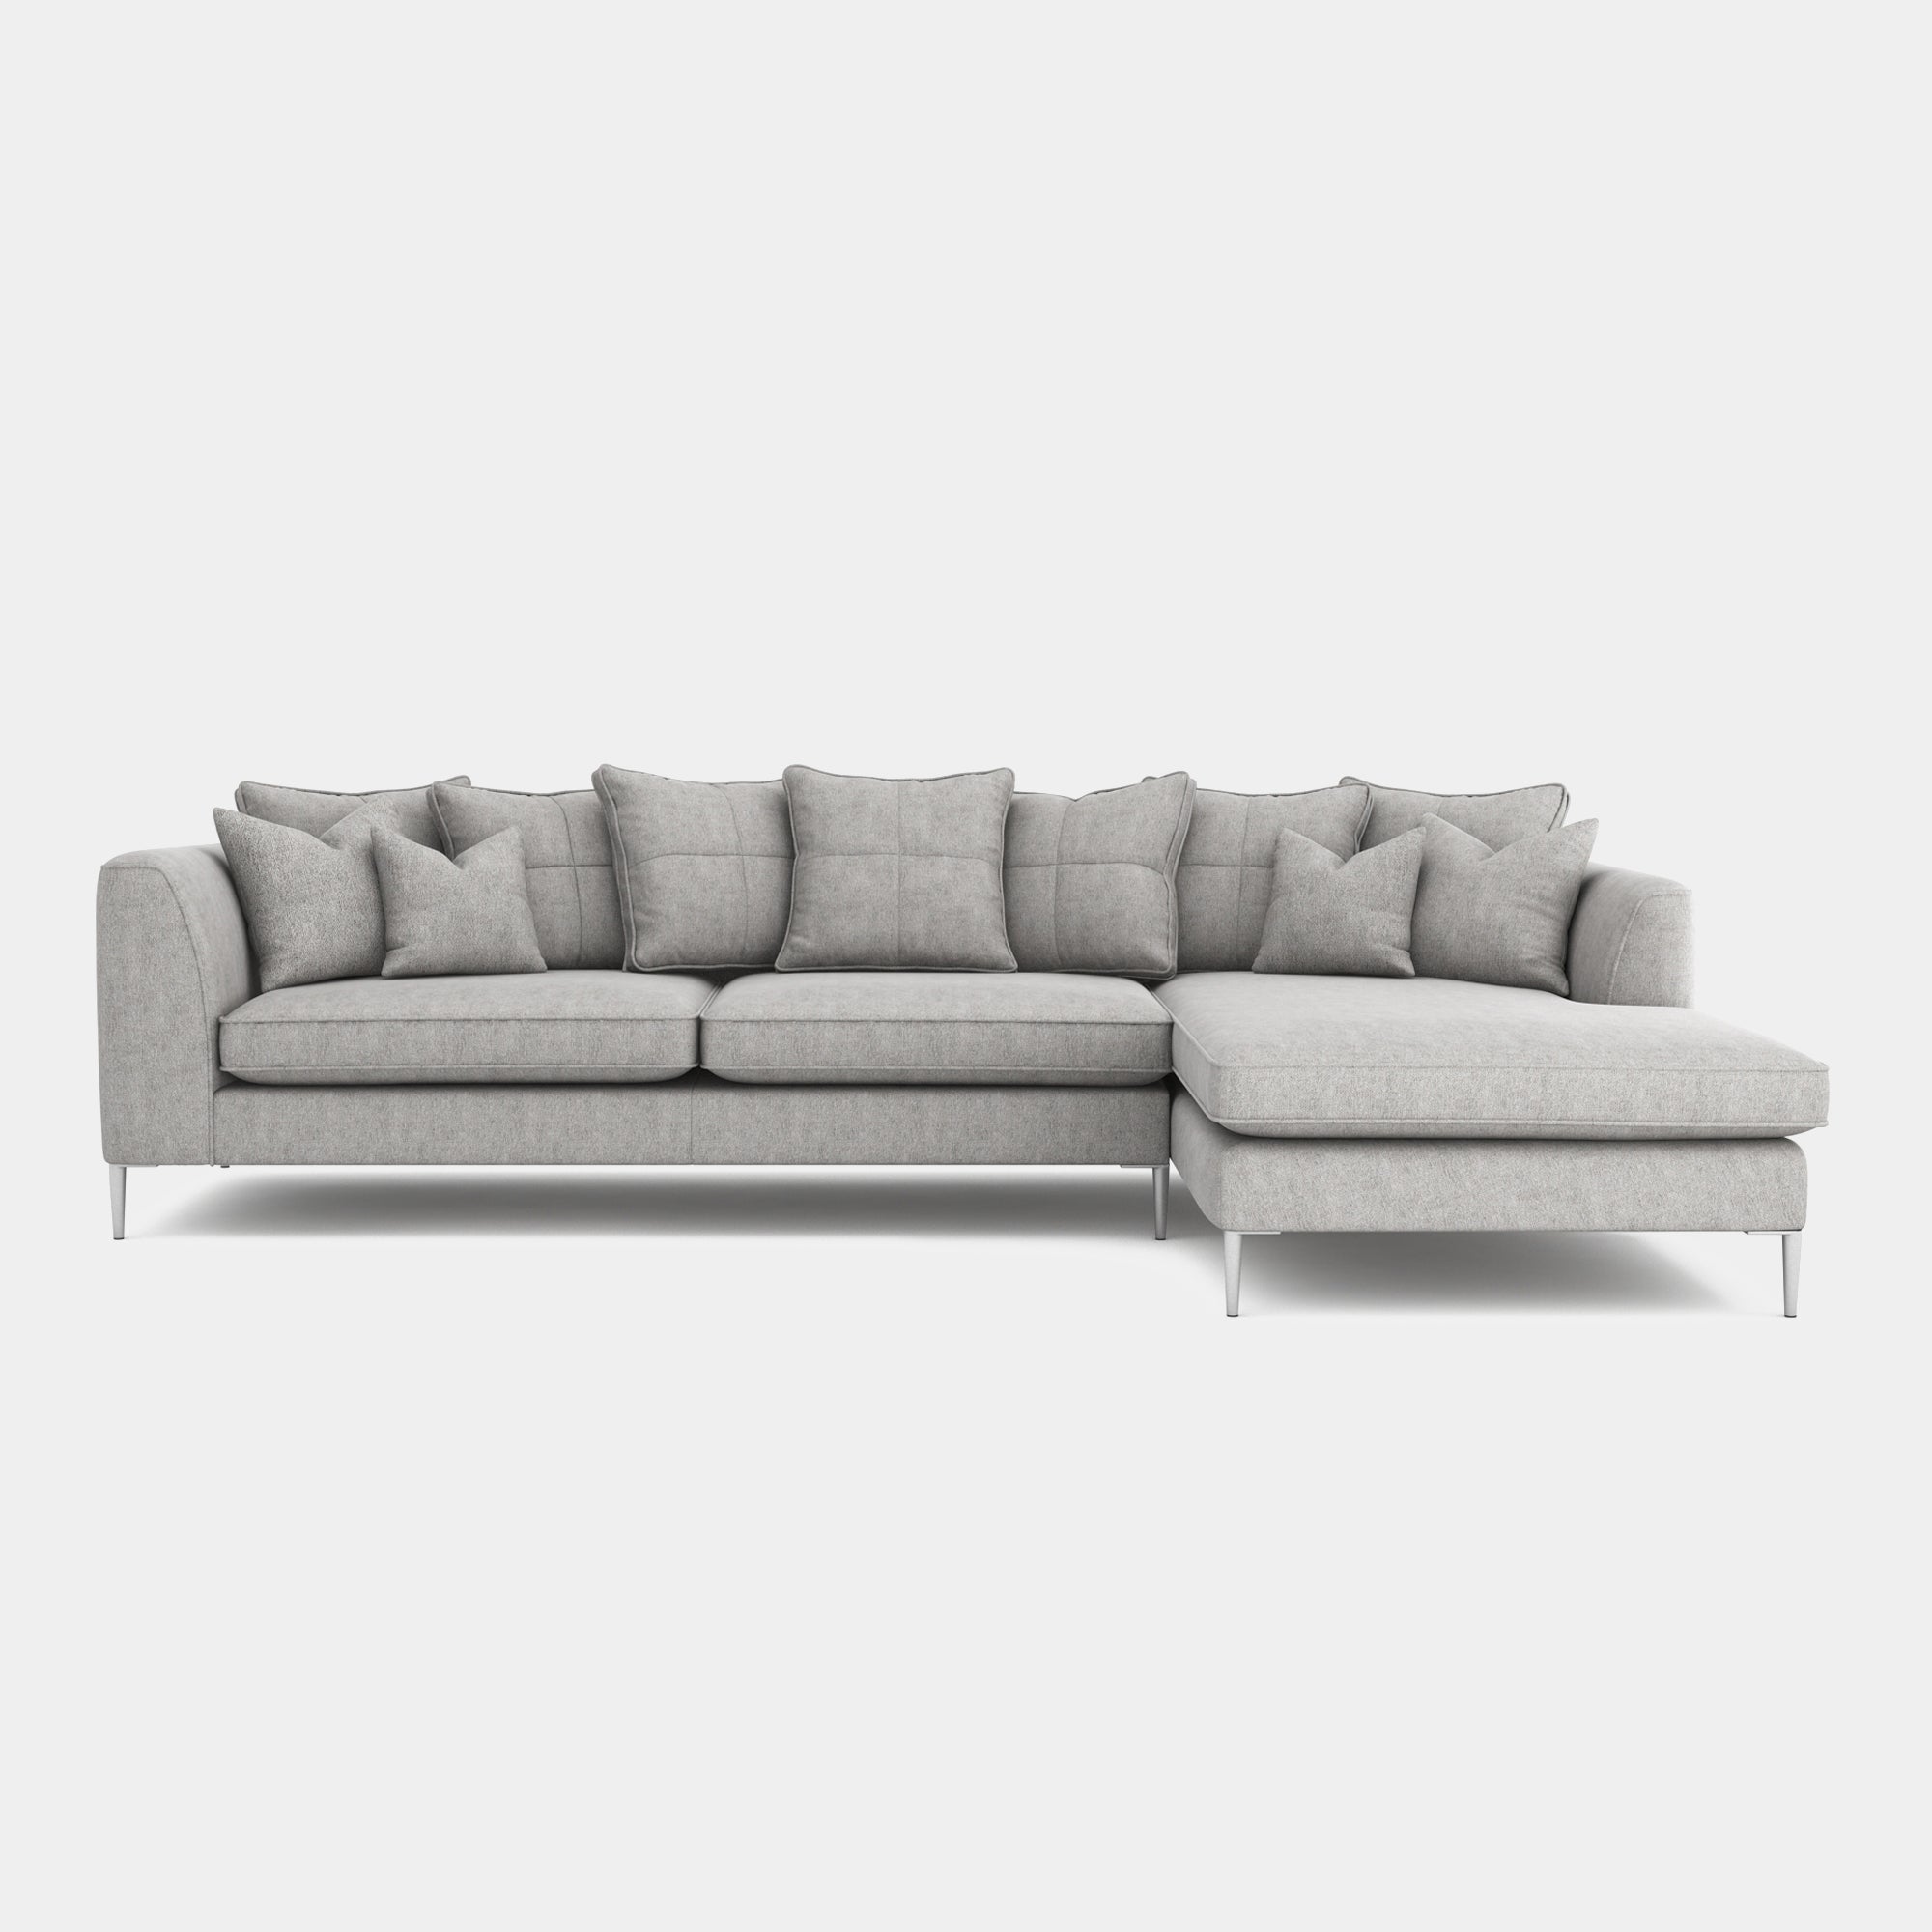 Colorado - Pillow Back Large Chaise Sofa 3 Seat 1 Arm LHF With Chaise RHF In Grade B Fabric